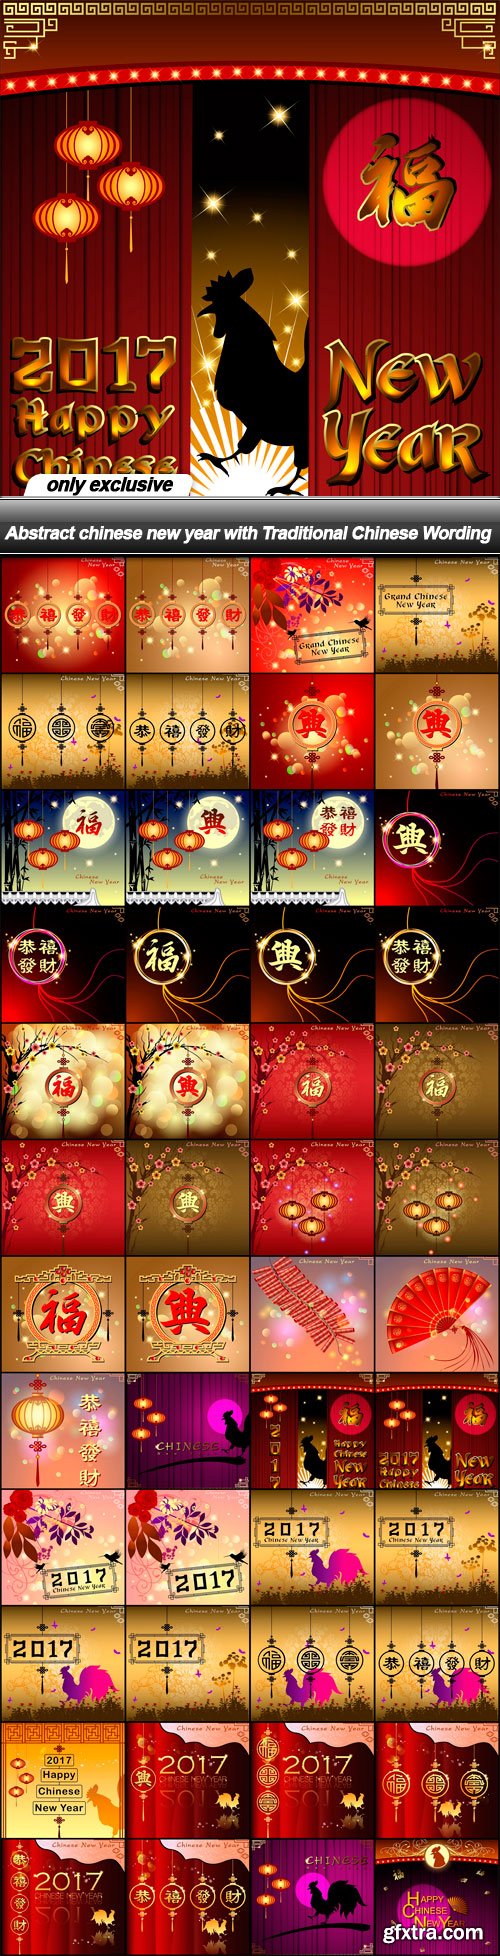 Abstract chinese new year with Traditional Chinese Wording - 48 EPS